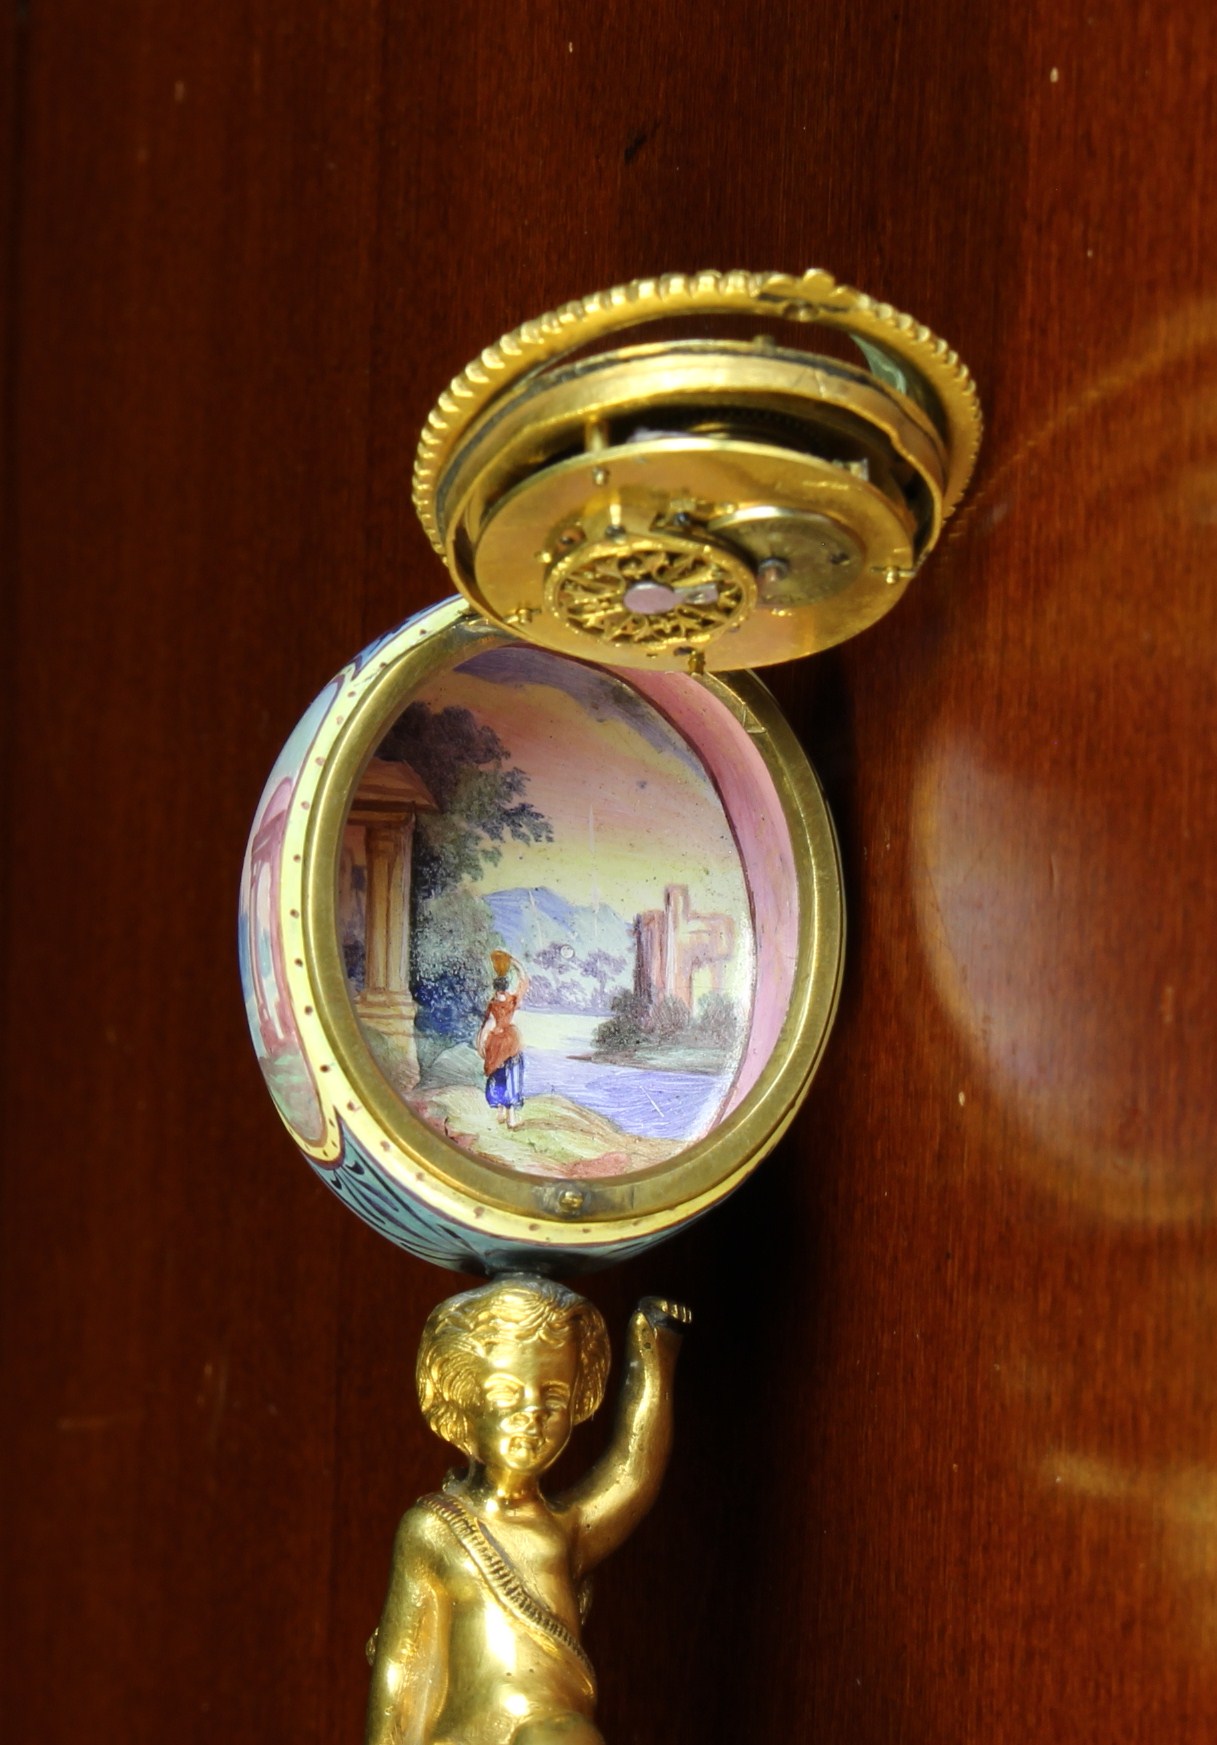 A Fine Late 19th Century Viennese Enamel & Gilt Bronze Figural Table Clock. - Image 4 of 4